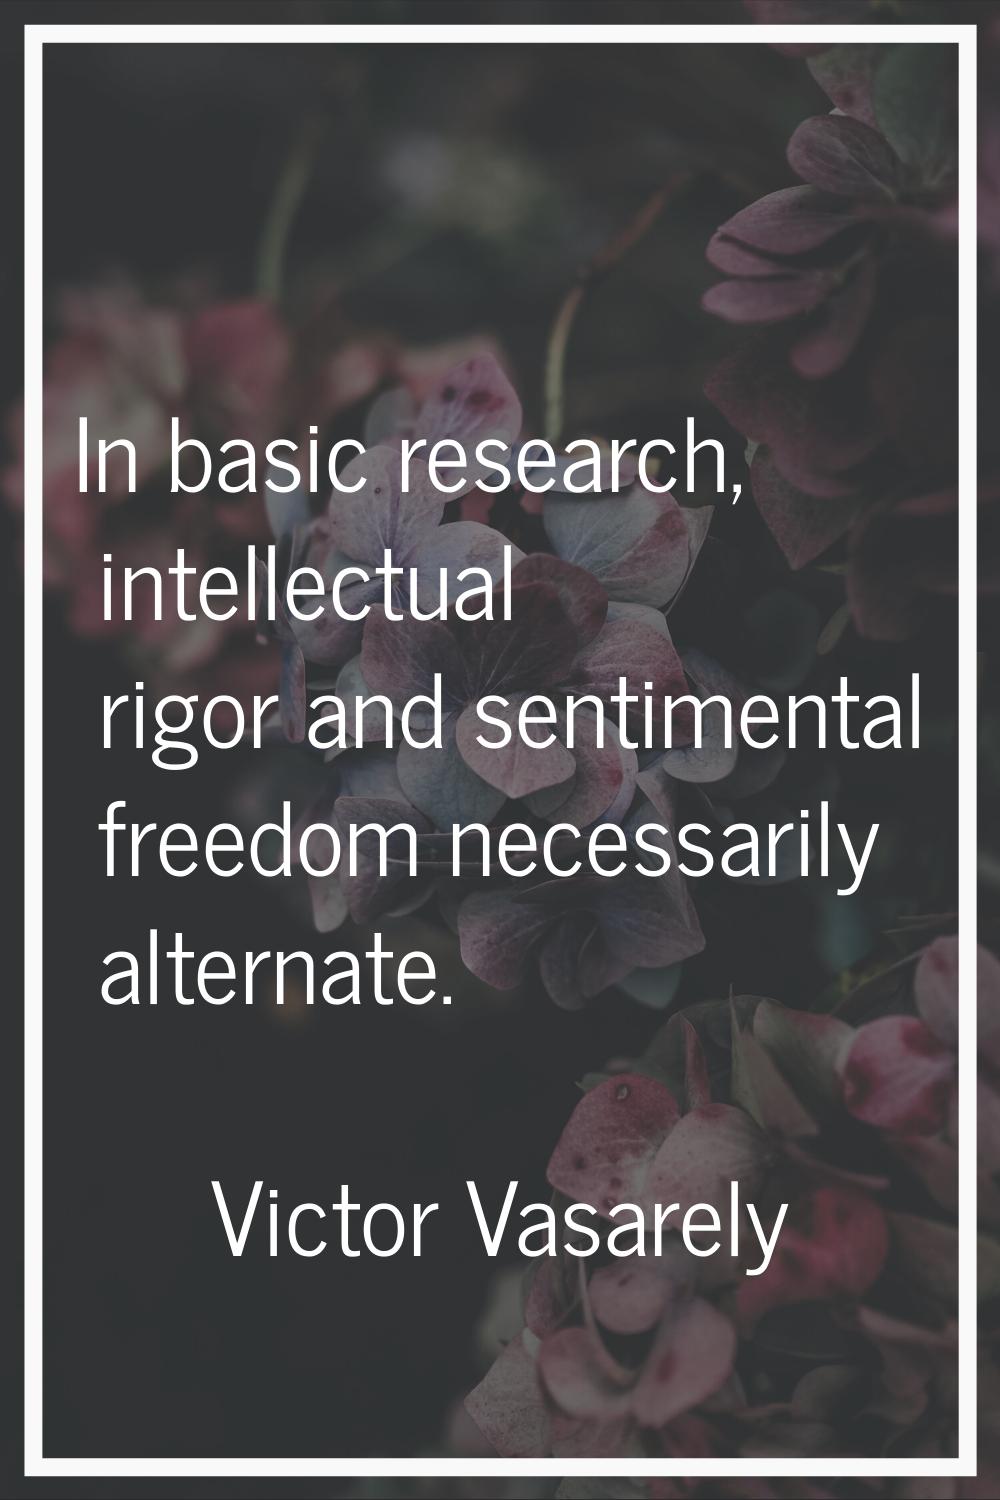 In basic research, intellectual rigor and sentimental freedom necessarily alternate.